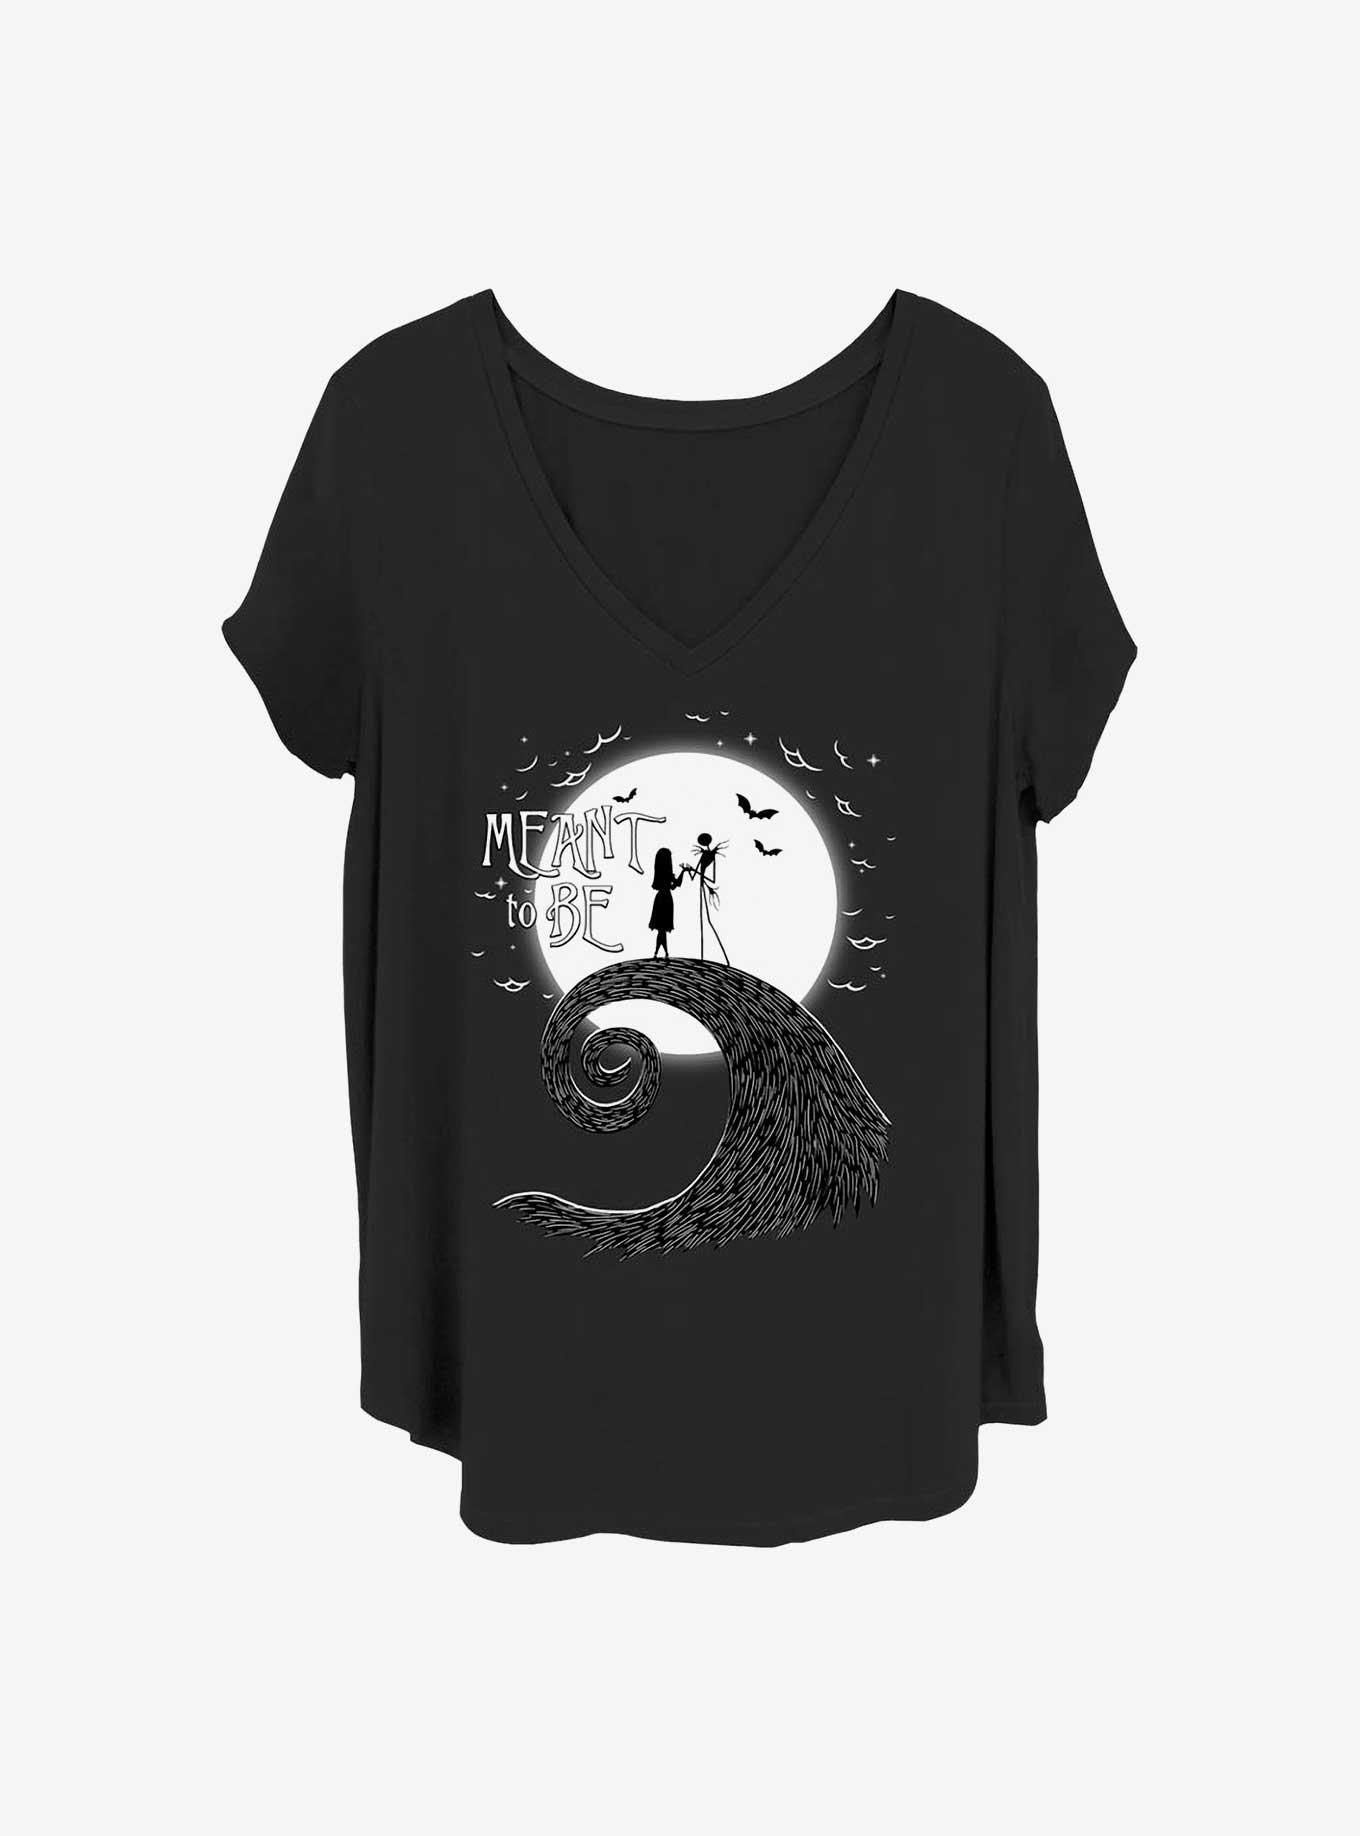 Disney The Nightmare Before Christmas Meant To Be Girls T-Shirt Plus